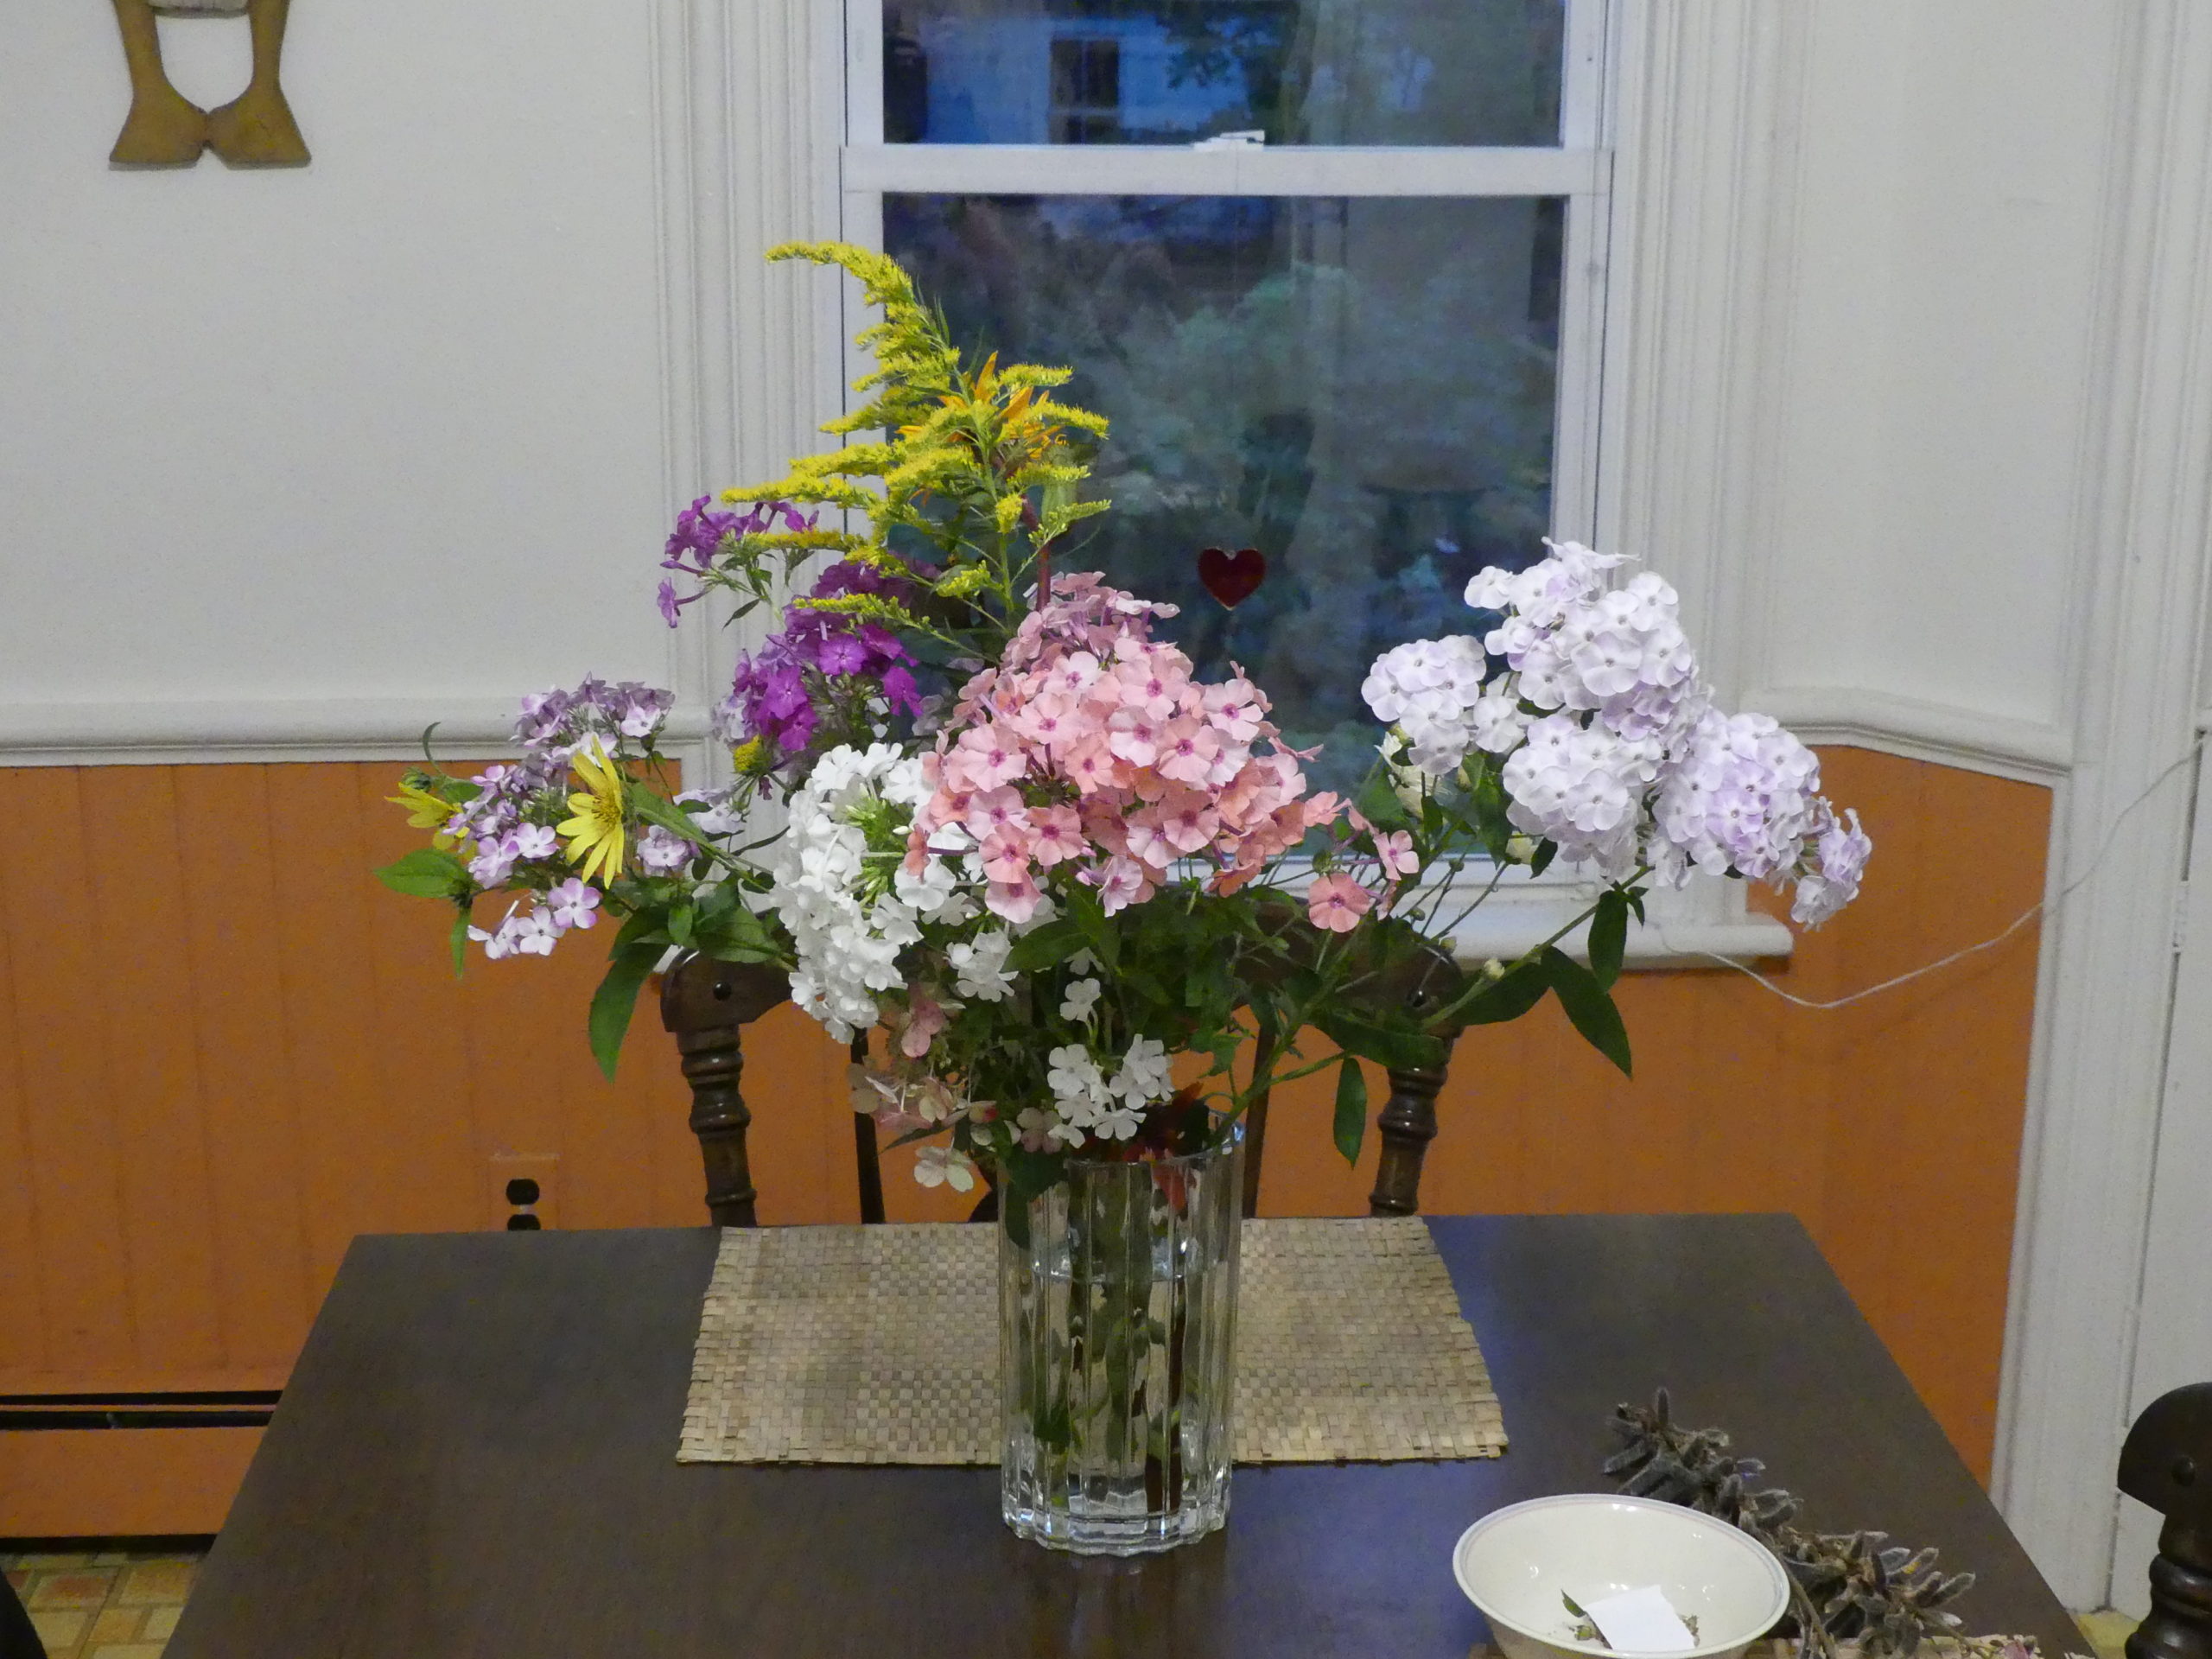 The Hampton Gardener’s kitchen table always had a vase of cuts on it from May through October. This vase has several varieties of tall phlox (Phlox p.), goldenrod and a couple of perennial sunflowers (left). The Phlox has a mild but delightful scent.